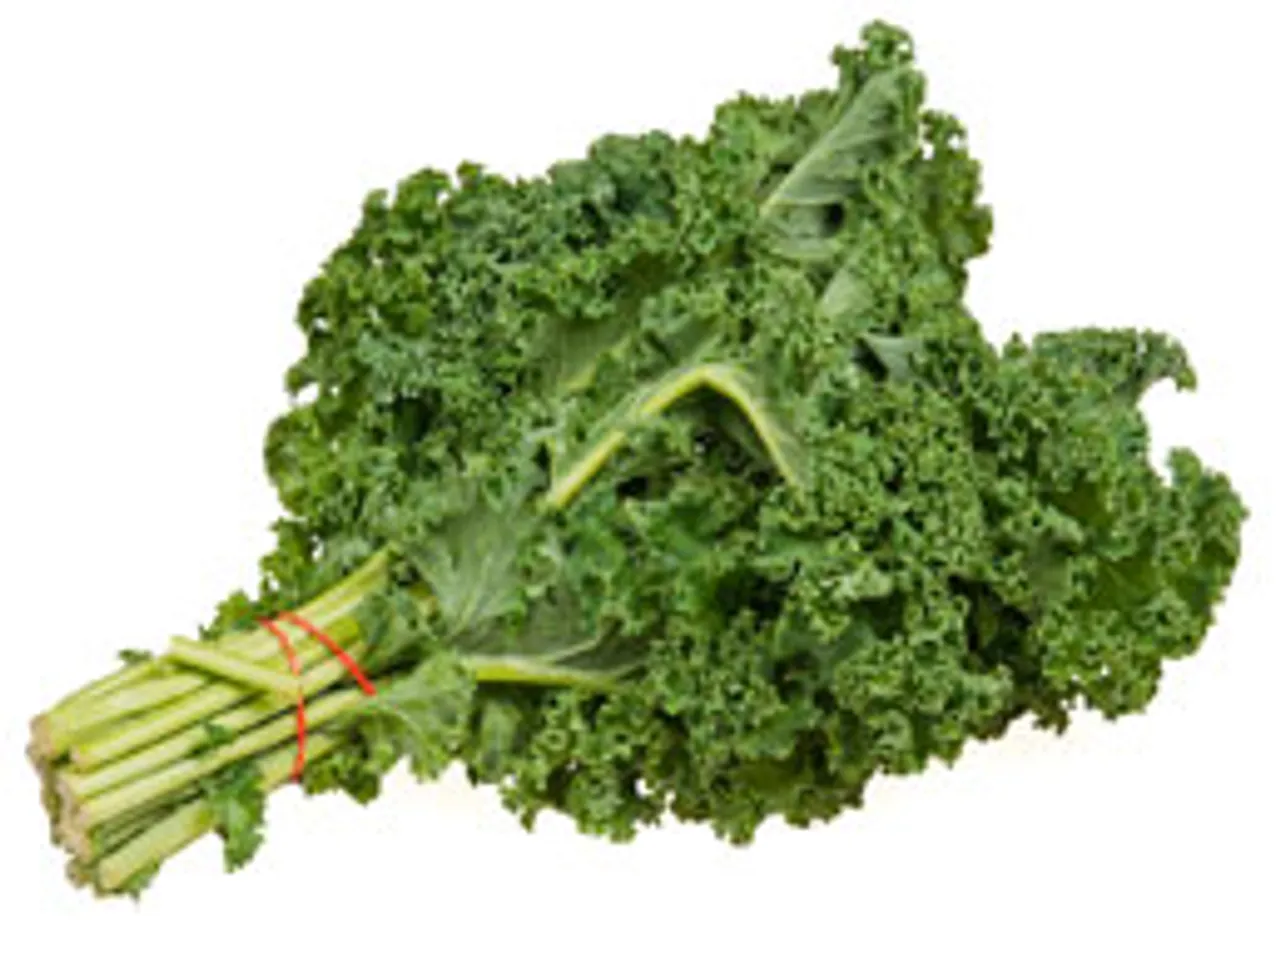 The tale of kale